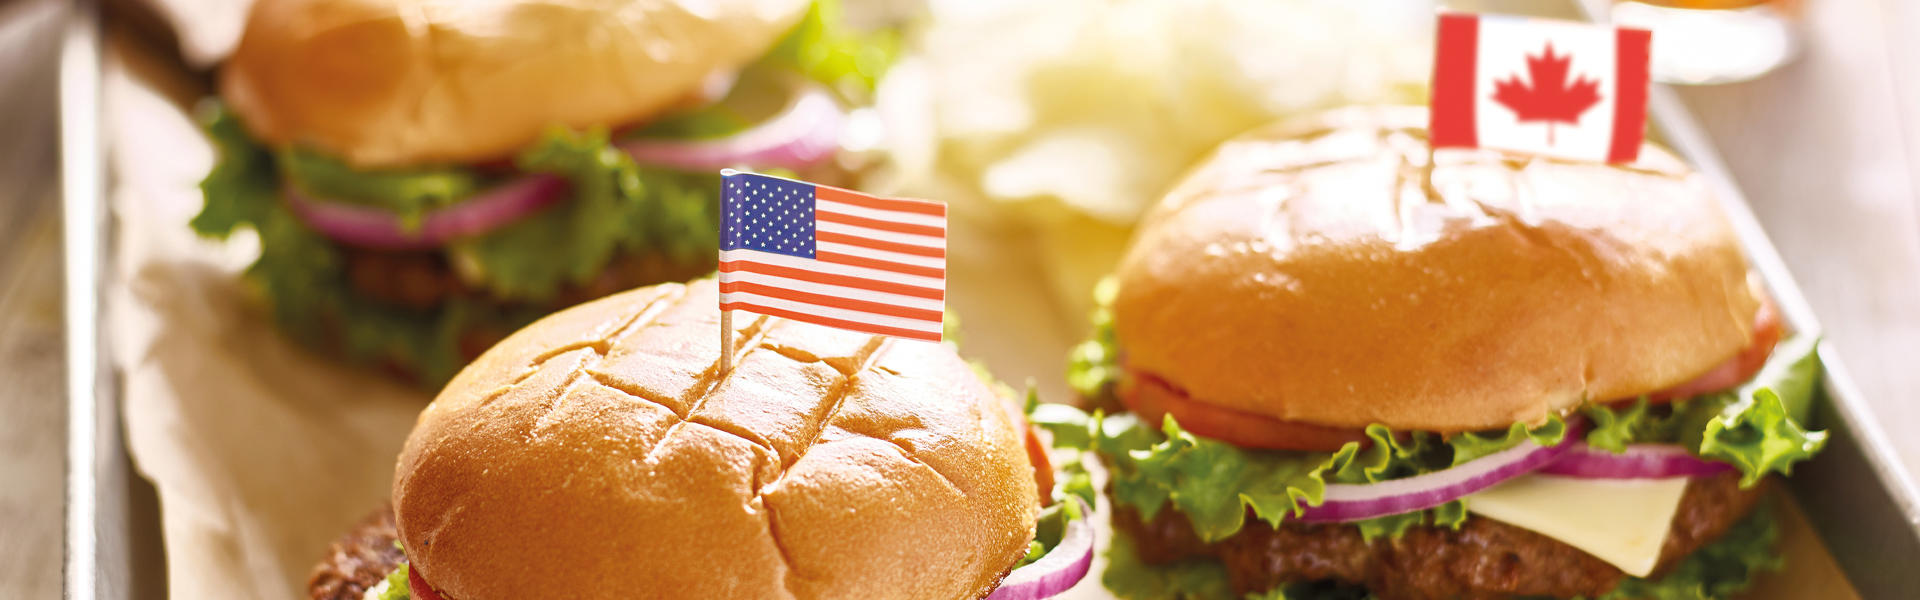 burger-with-flags